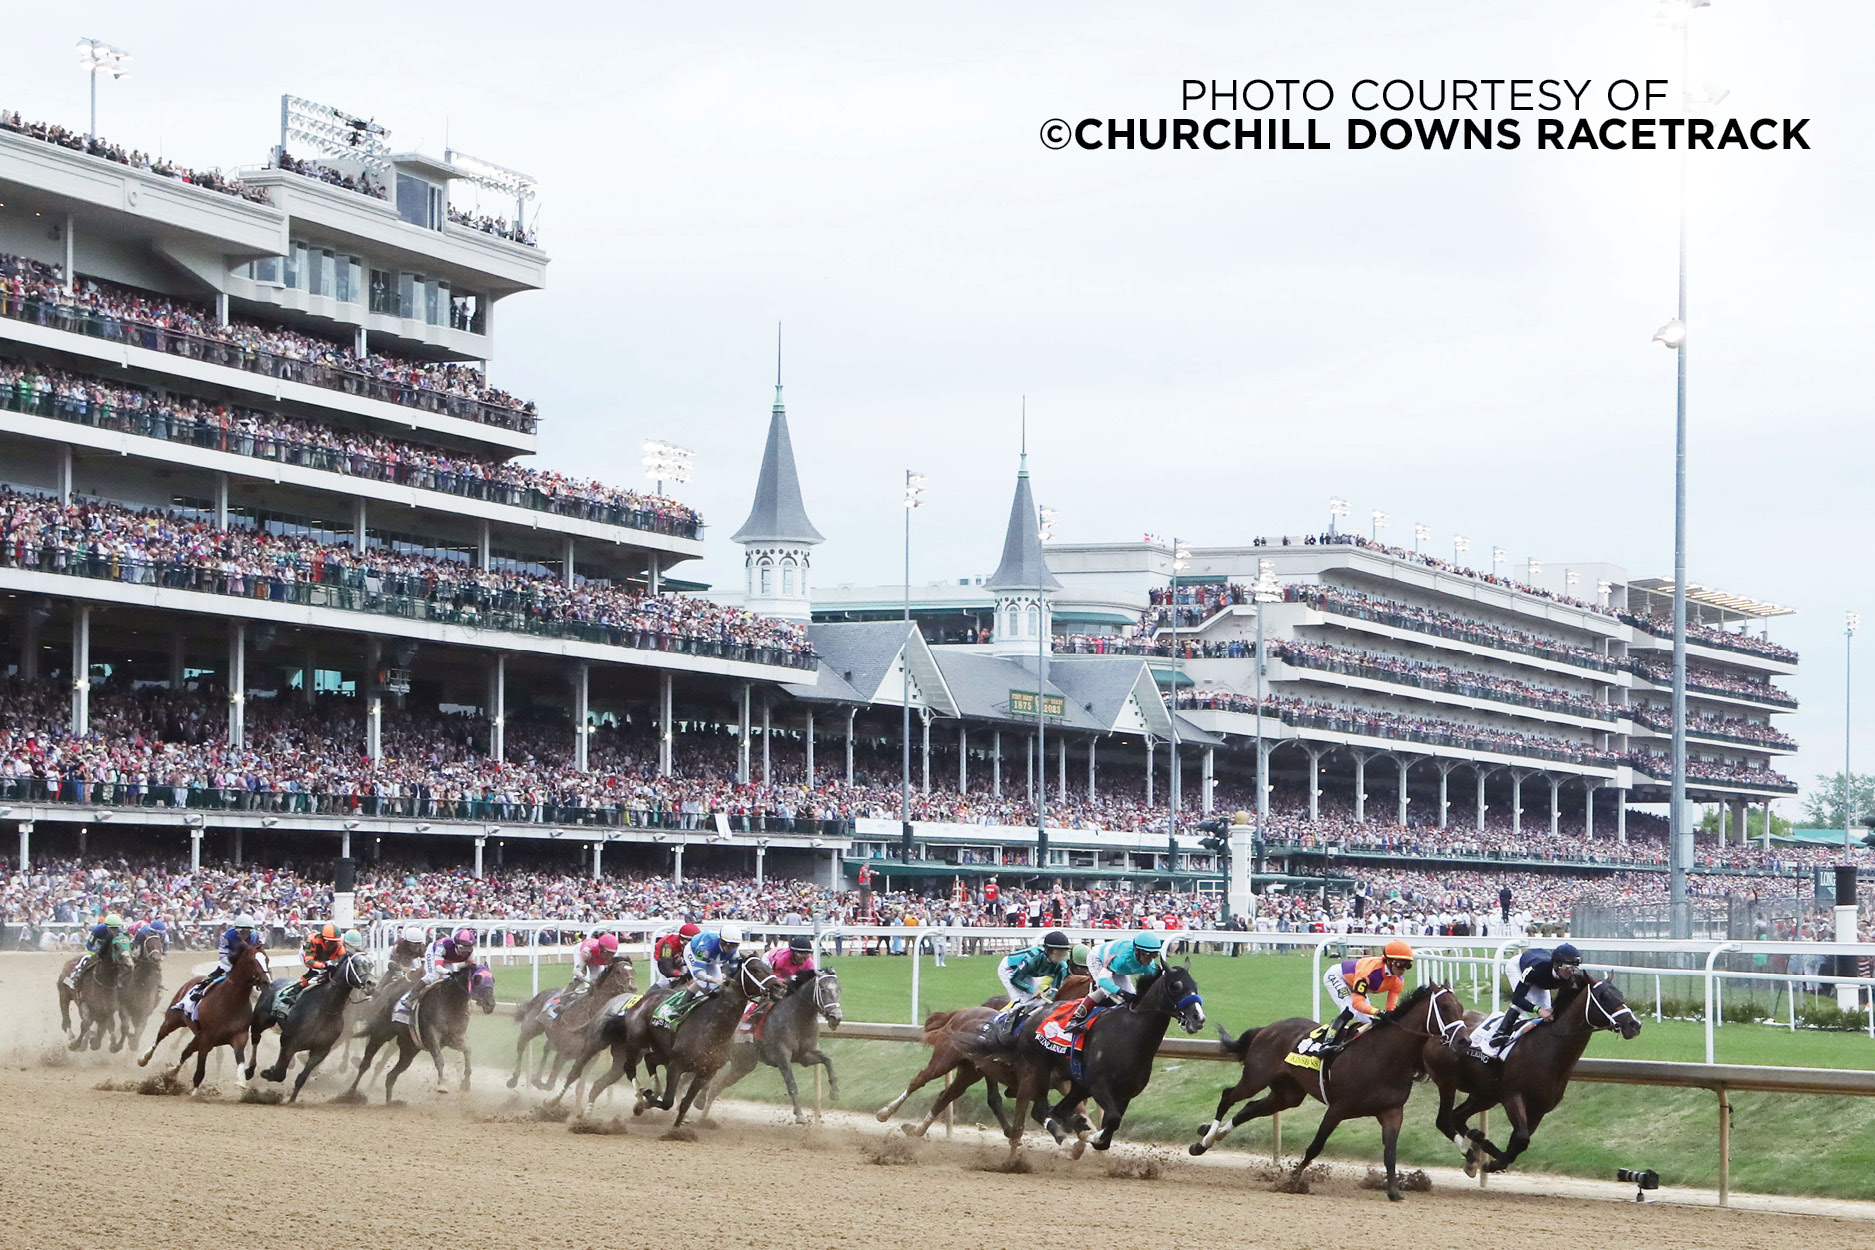 Churchill downs racetrack during the Kentucky derby